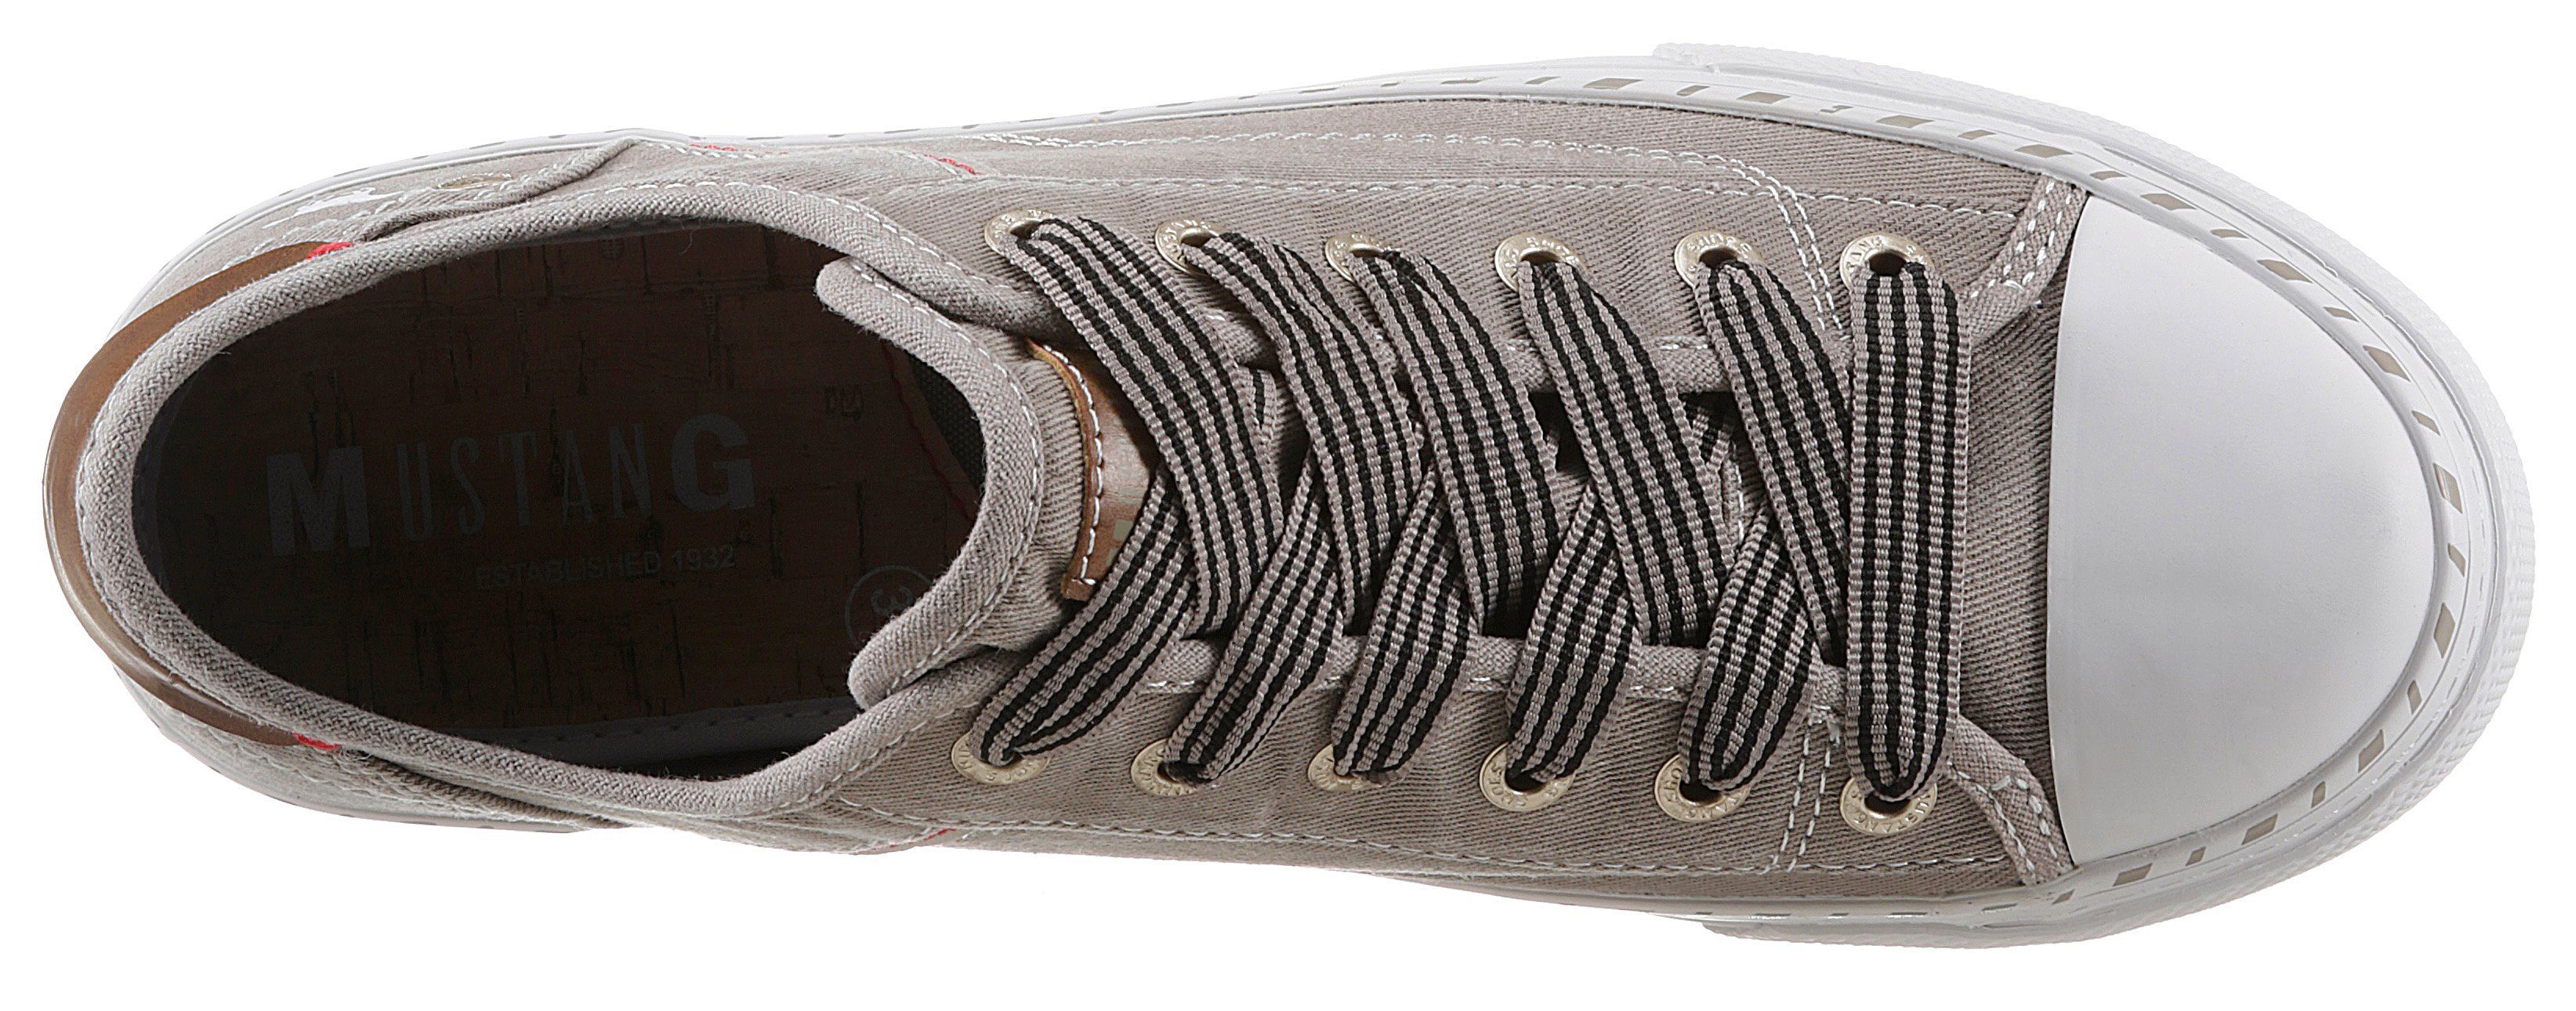 Mustang Shoes Sneaker mit 3 Plateausohle taupe cm